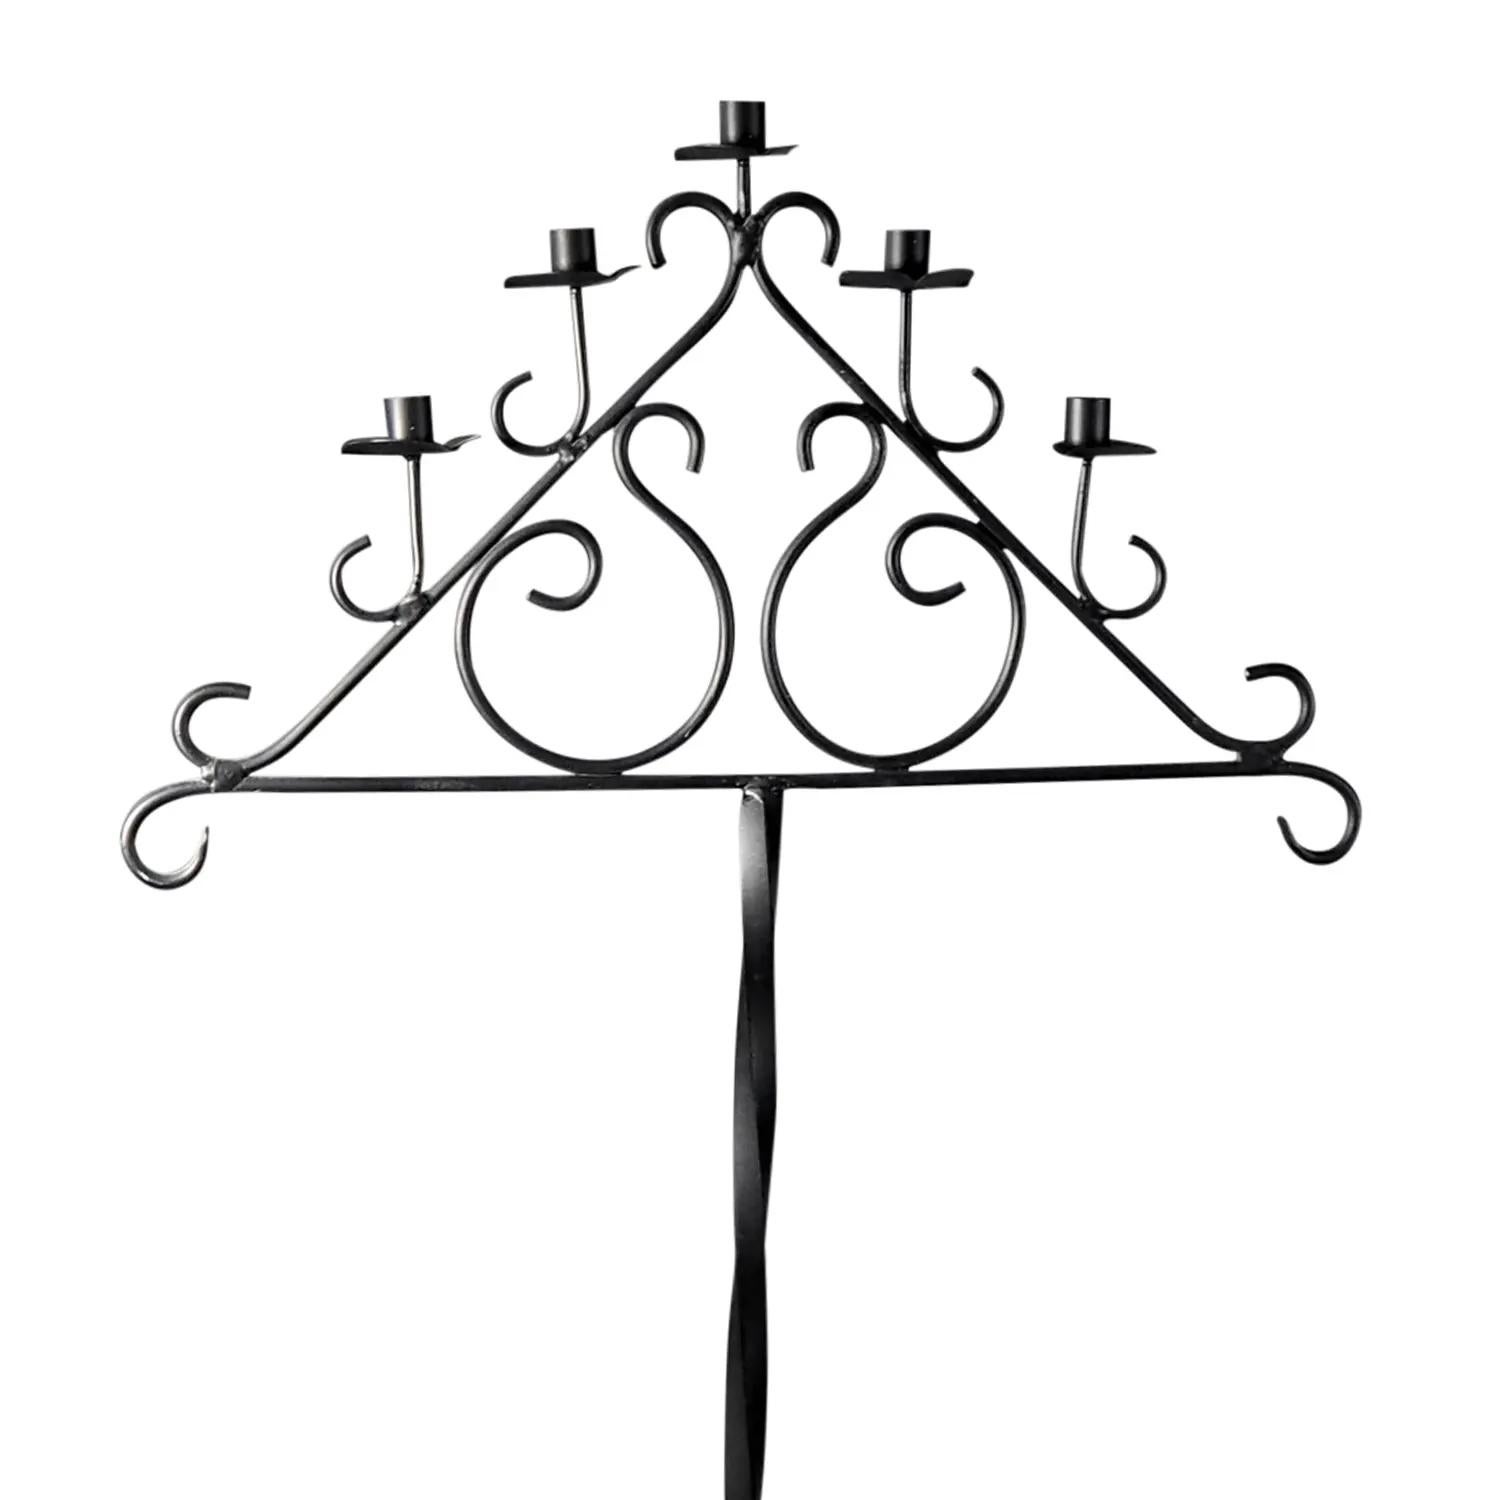 A black, vintage Art Deco French floor candelabra made of handcrafted forged metal and wrought iron, in good condition. The detailed candle holder is composed with five candle sticks. The stem of the décor piece is supported by four curved,